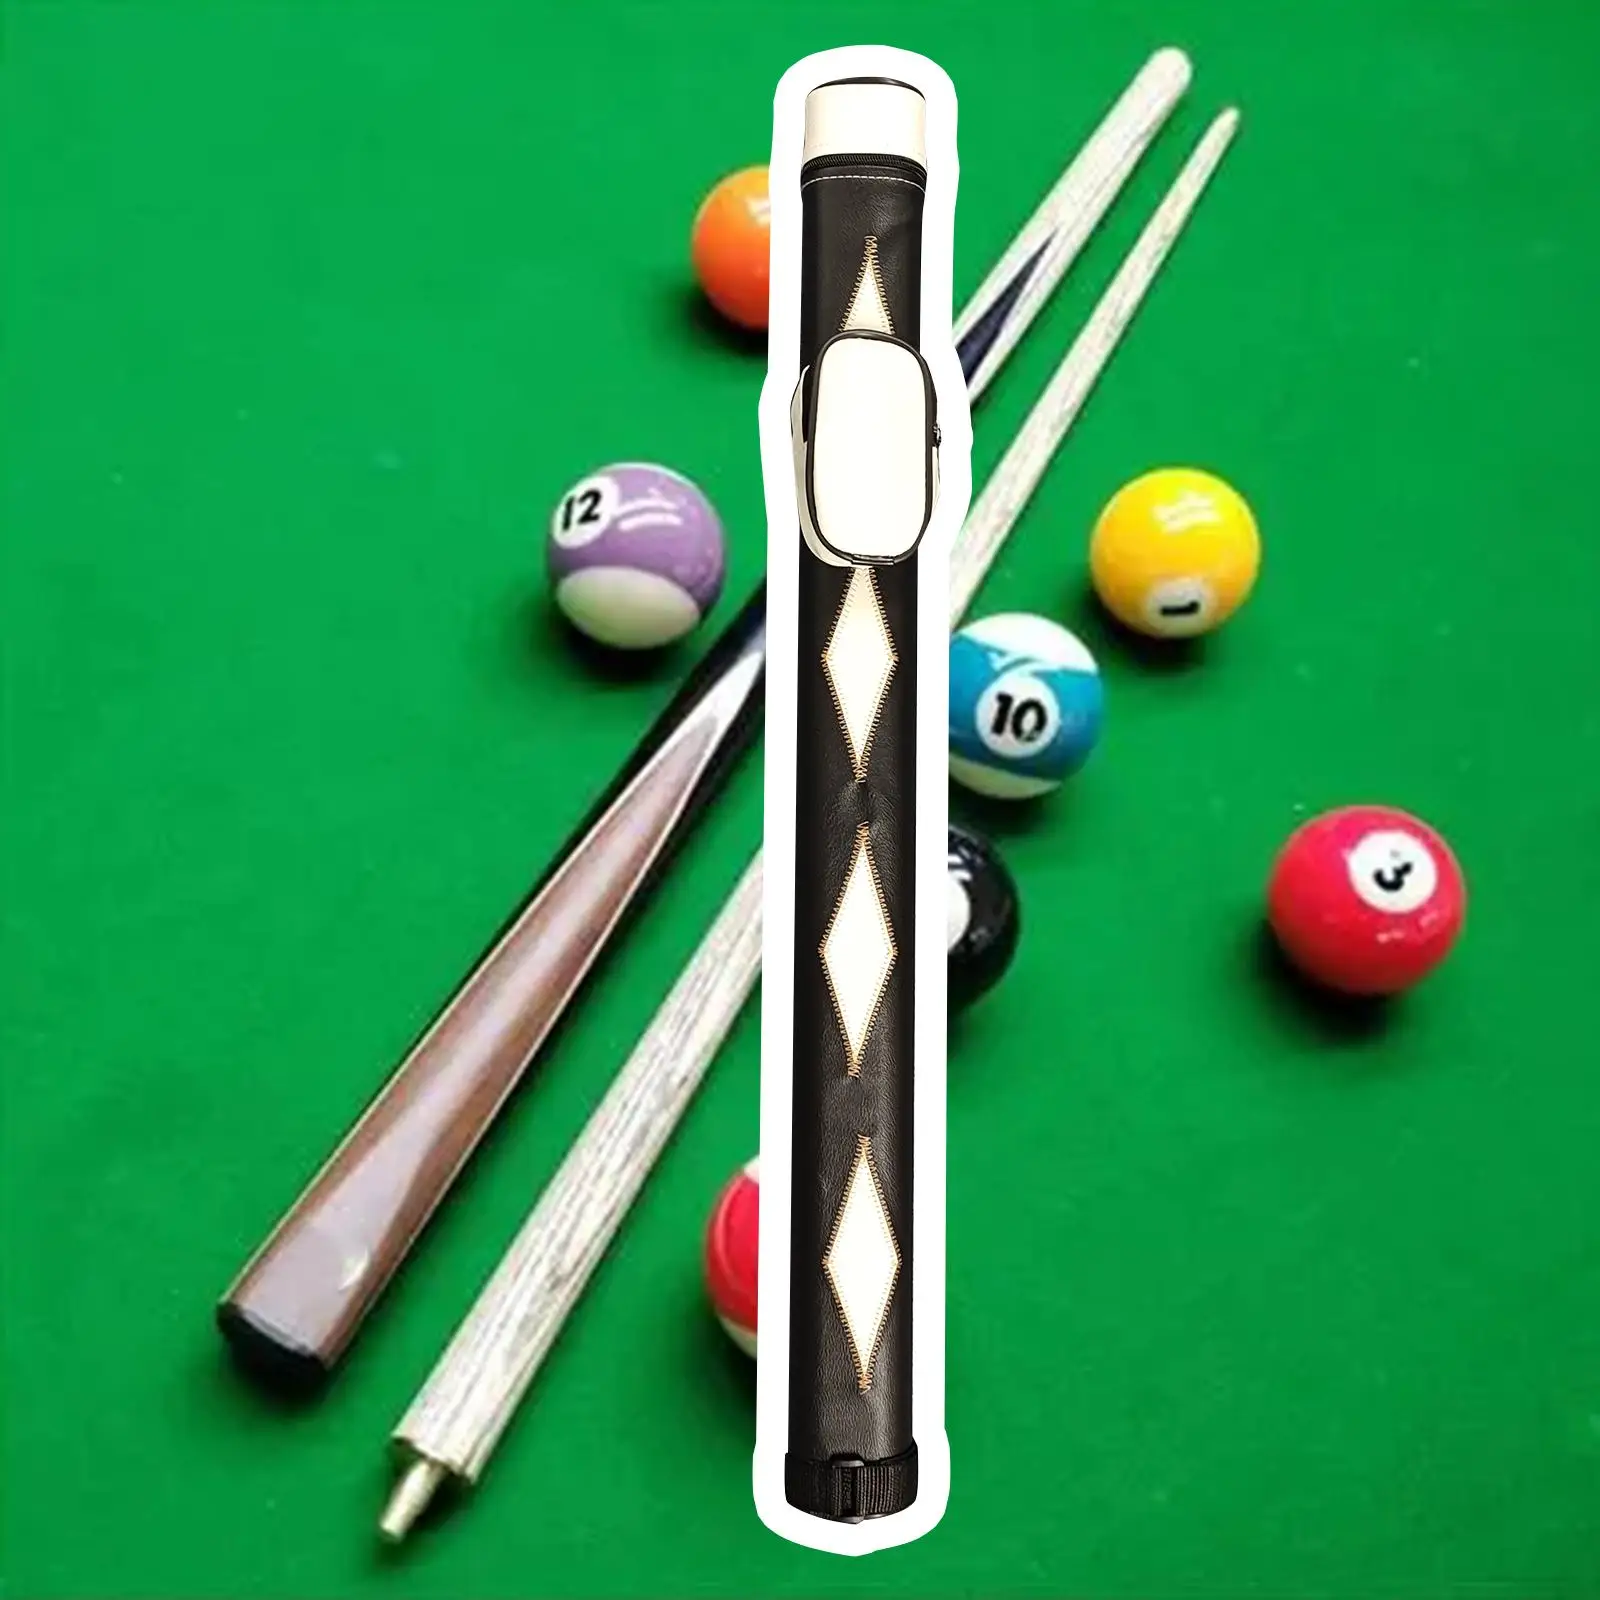 Billiards Pool Cue Case PU Leather Adjustable Shoulder Strap Zipper Pool Cue Pouch for Games Sports Travel Snooker Club Supplies